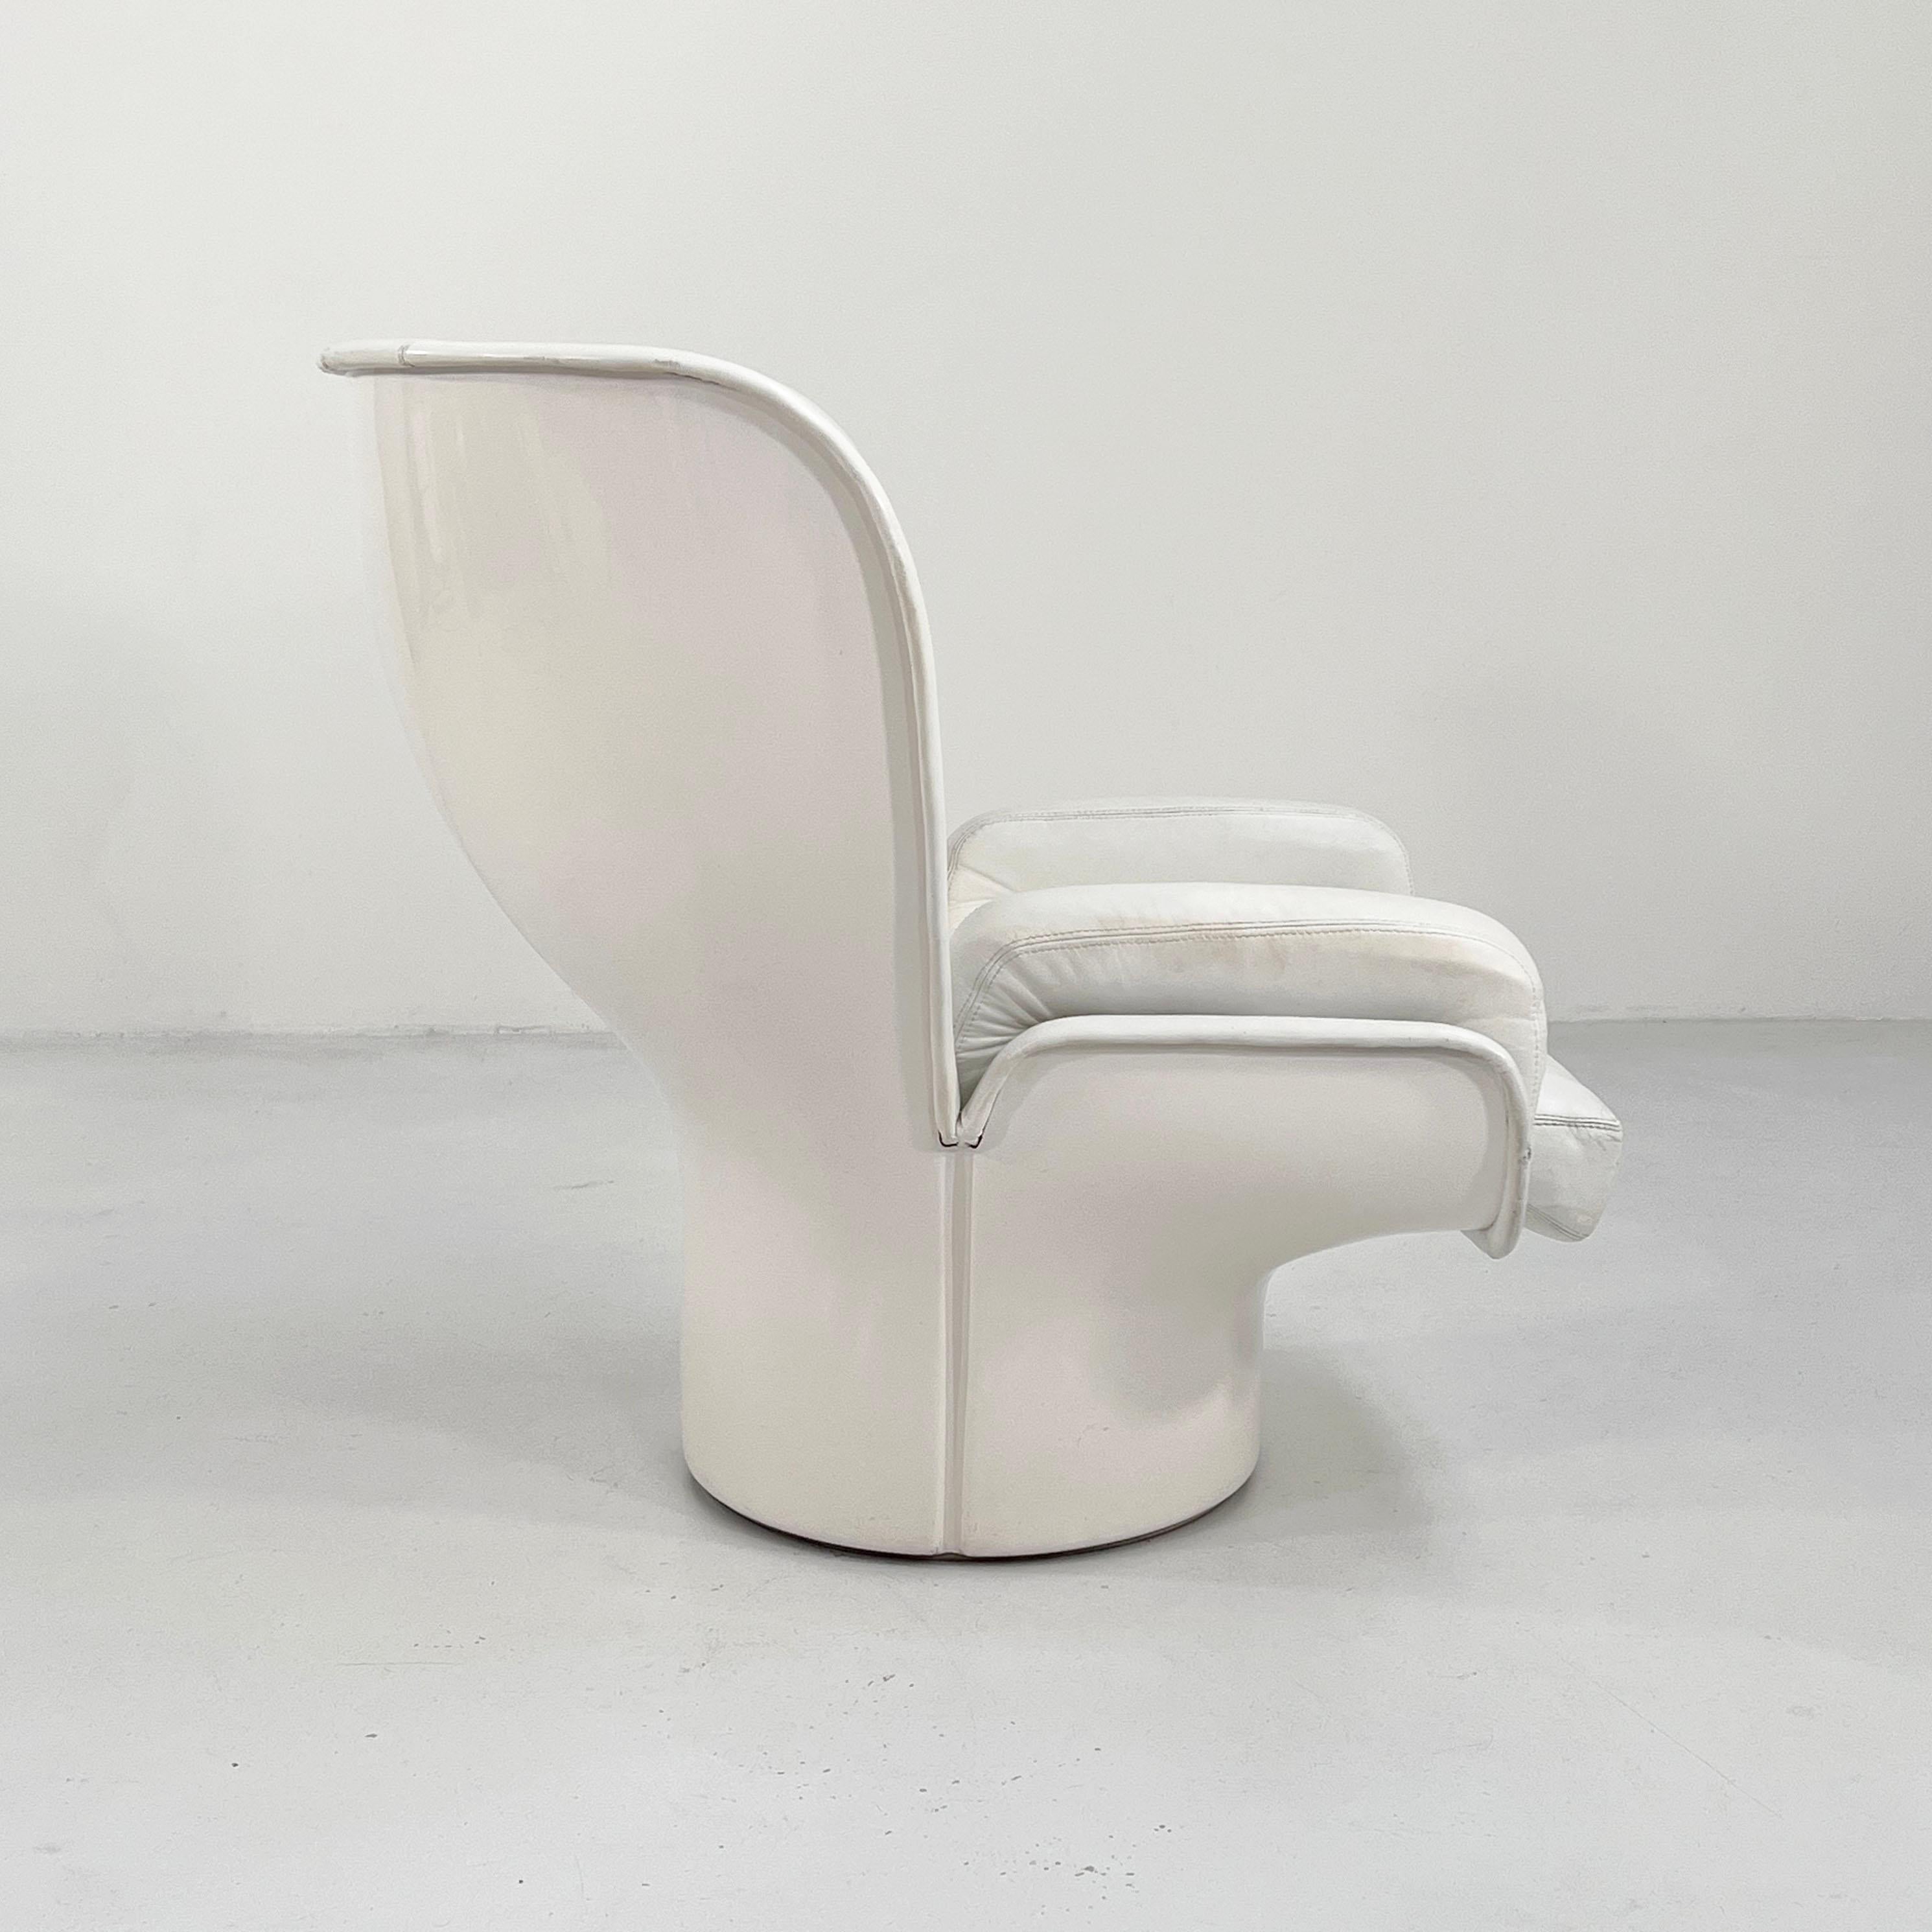 Mid-20th Century White Elda Lounge Chair by Joe Colombo for Comfort, 1960s